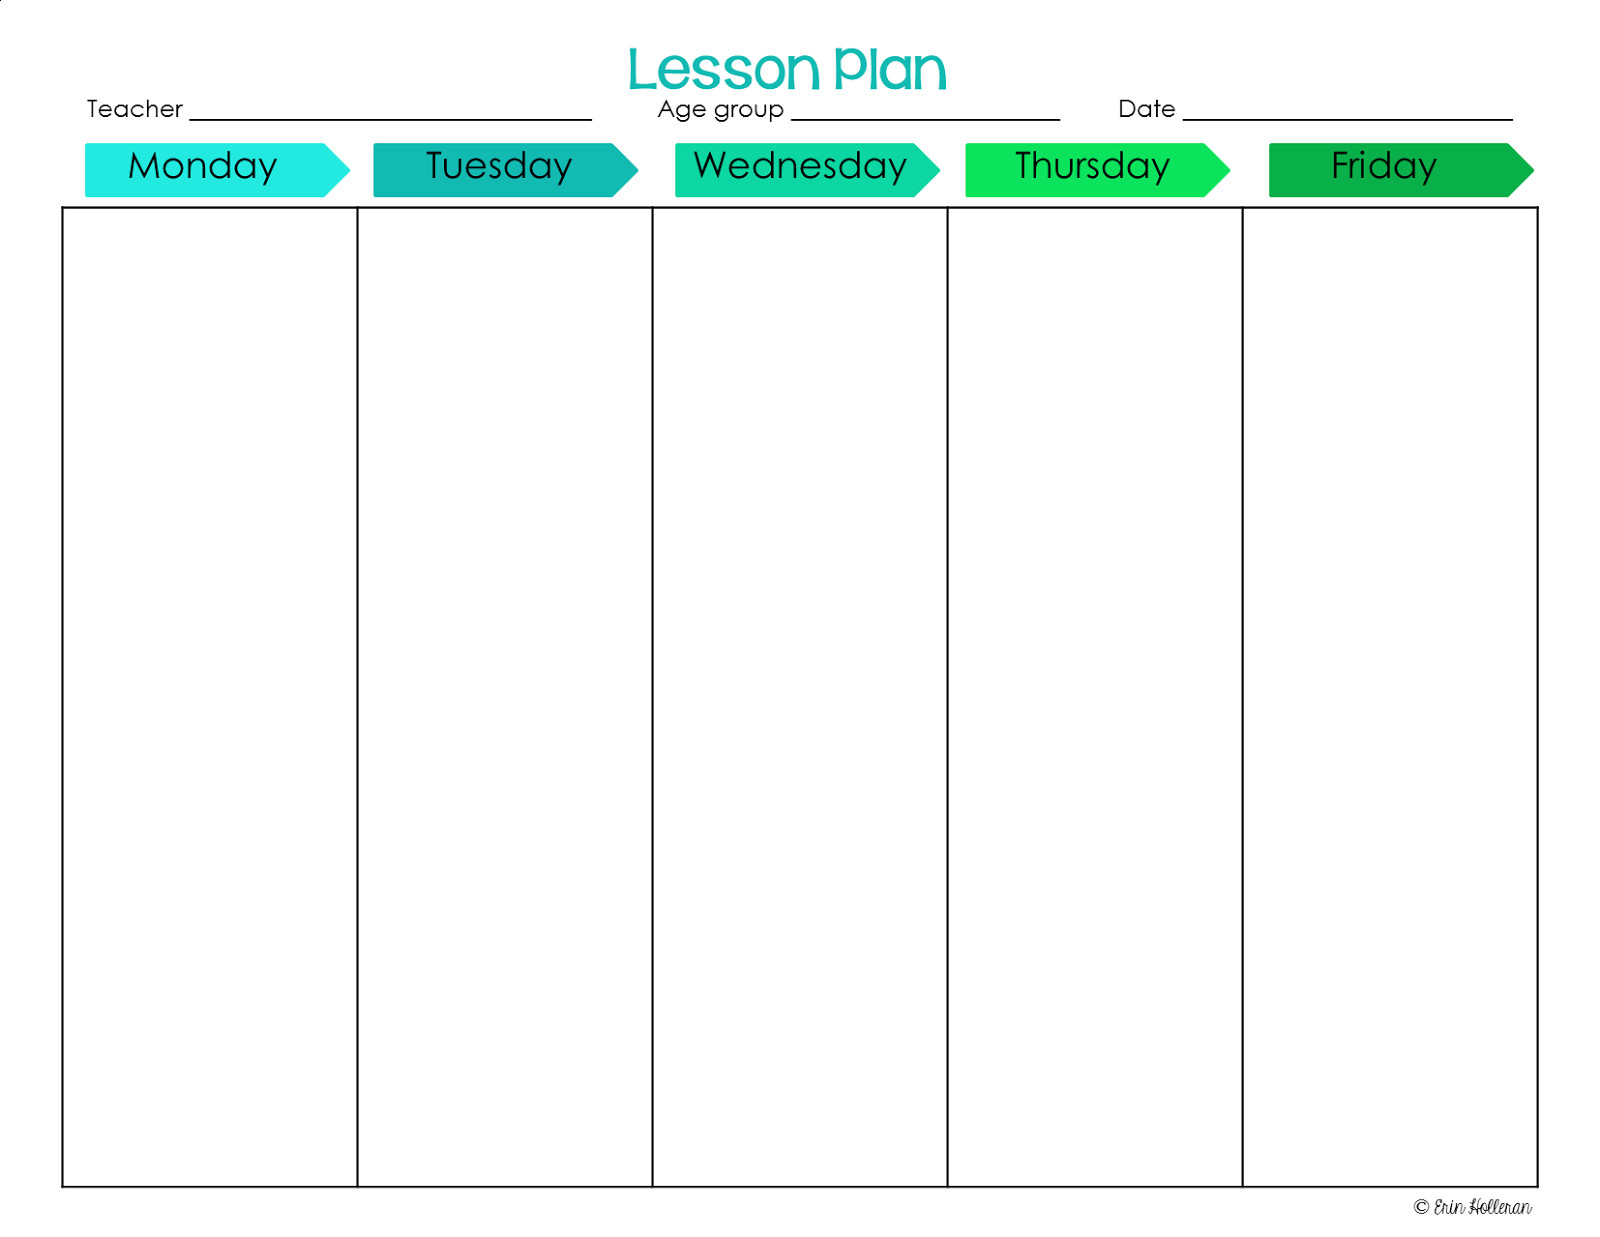 Creating A Lesson Plan Preschool Ponderings Make Your Lesson Plans Work for You